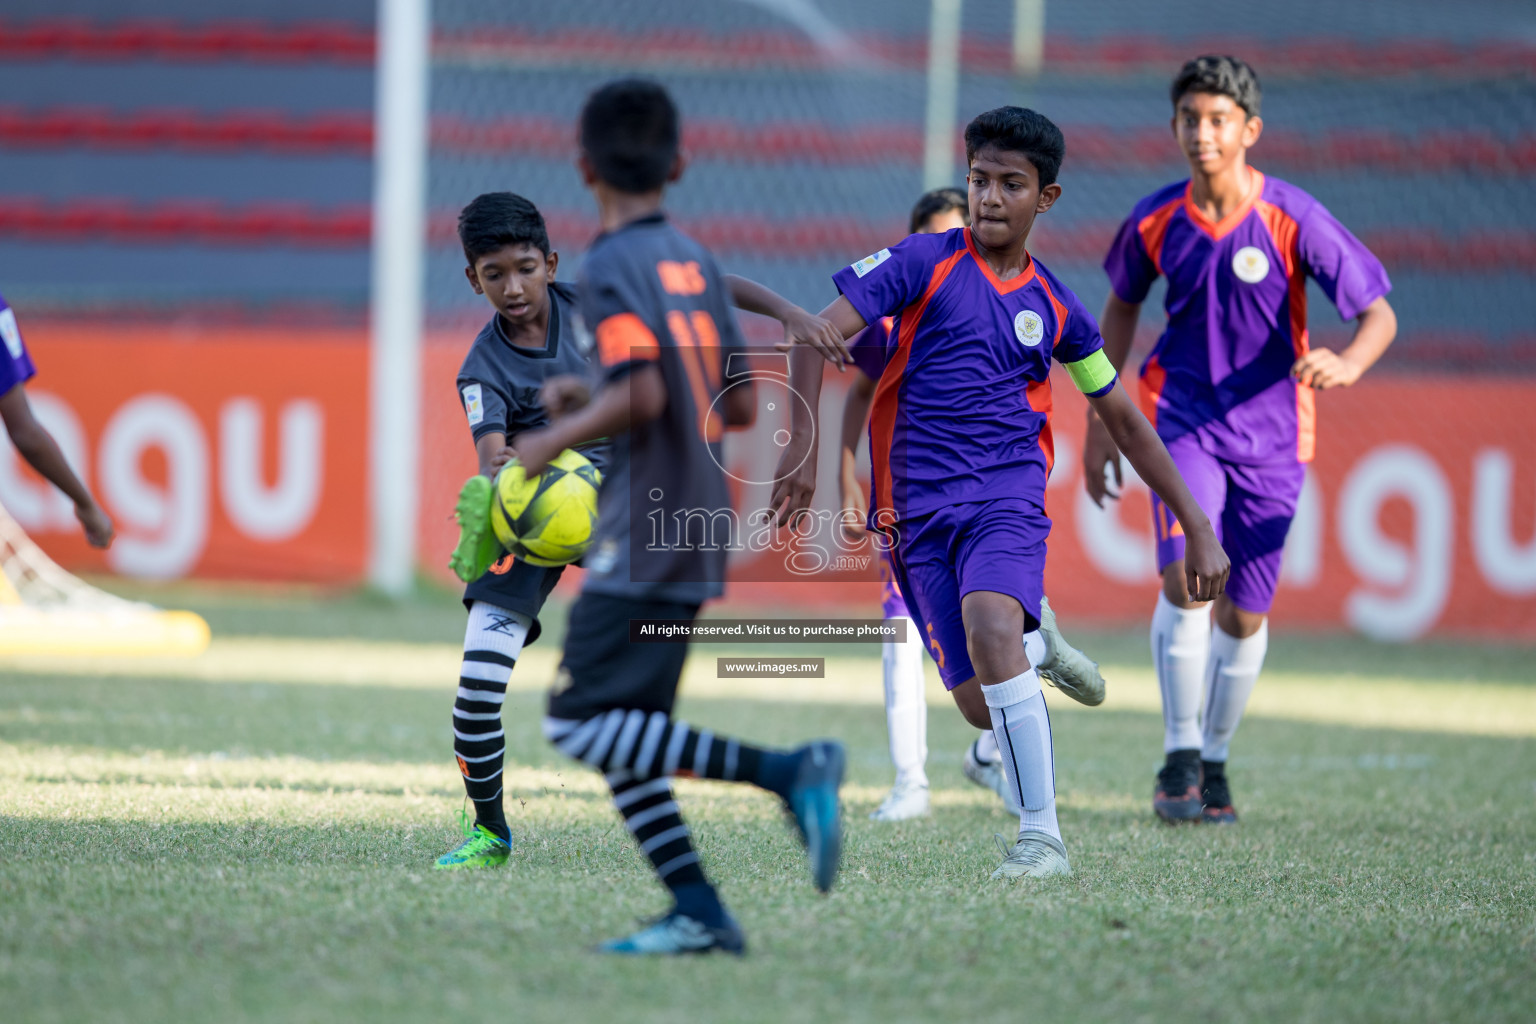 Ghaazee School and Ghiyaasudheen International School School in MAMEN Inter School Football Tournament 2019 (U13) in Male, Maldives on 4th April 2019 Photos: Ismail Thoriq / images.mv